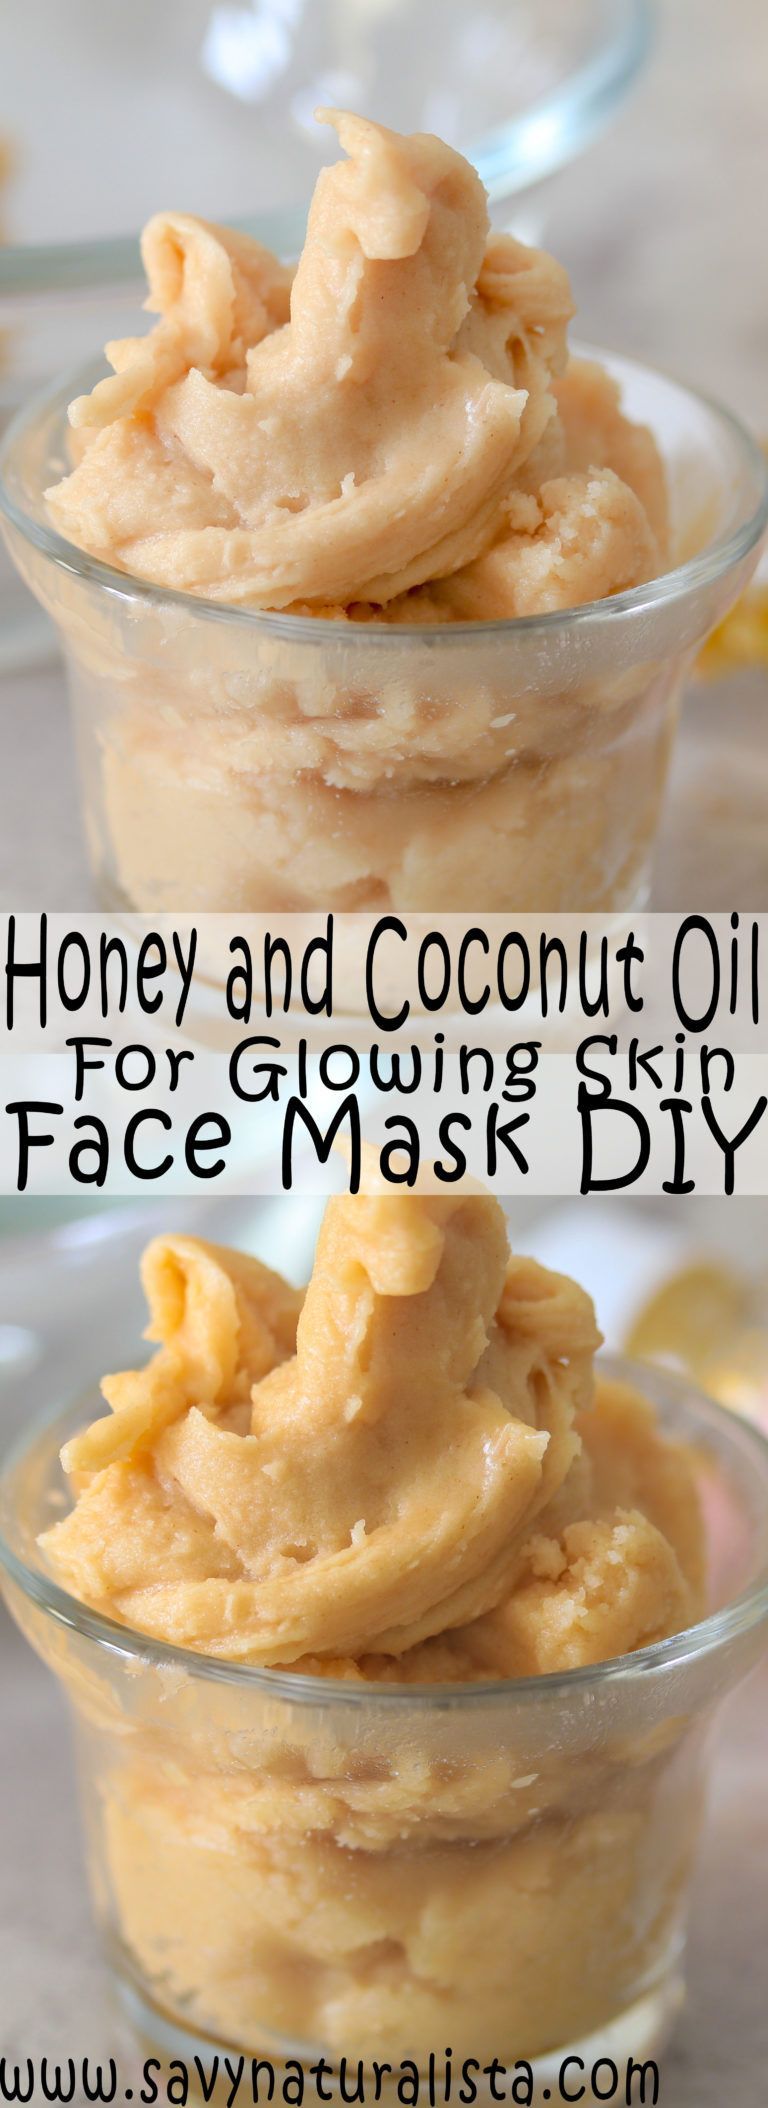 Honey and Coconut Oil Glowing Face Mask  - Savvy Naturalista -   17 diy Face Mask natural ideas